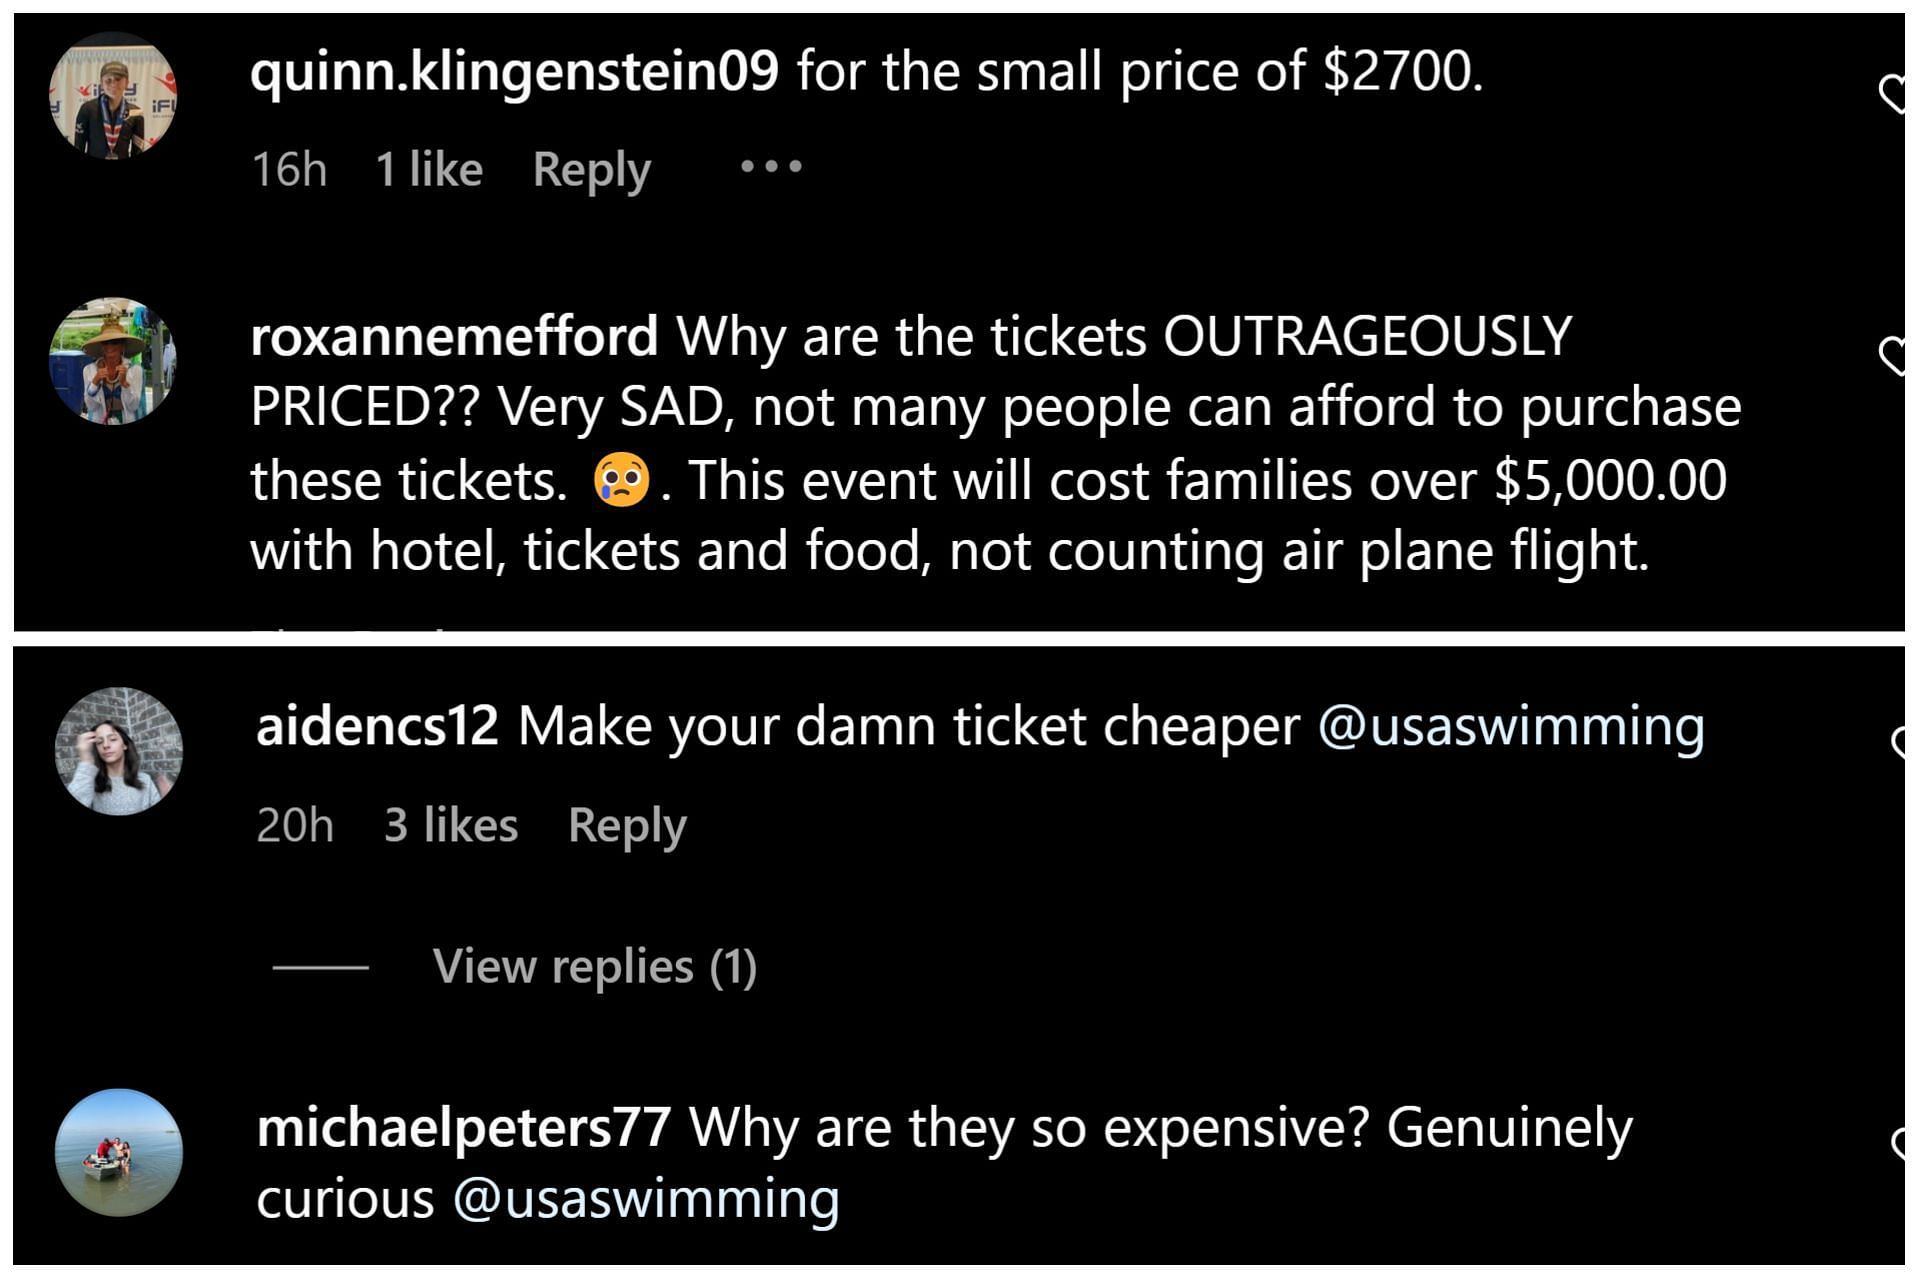 Fans take to the comments section to complain about the ticket prices for the 2024 National Olympic Trials: Image via Instagram (@usaswimming)